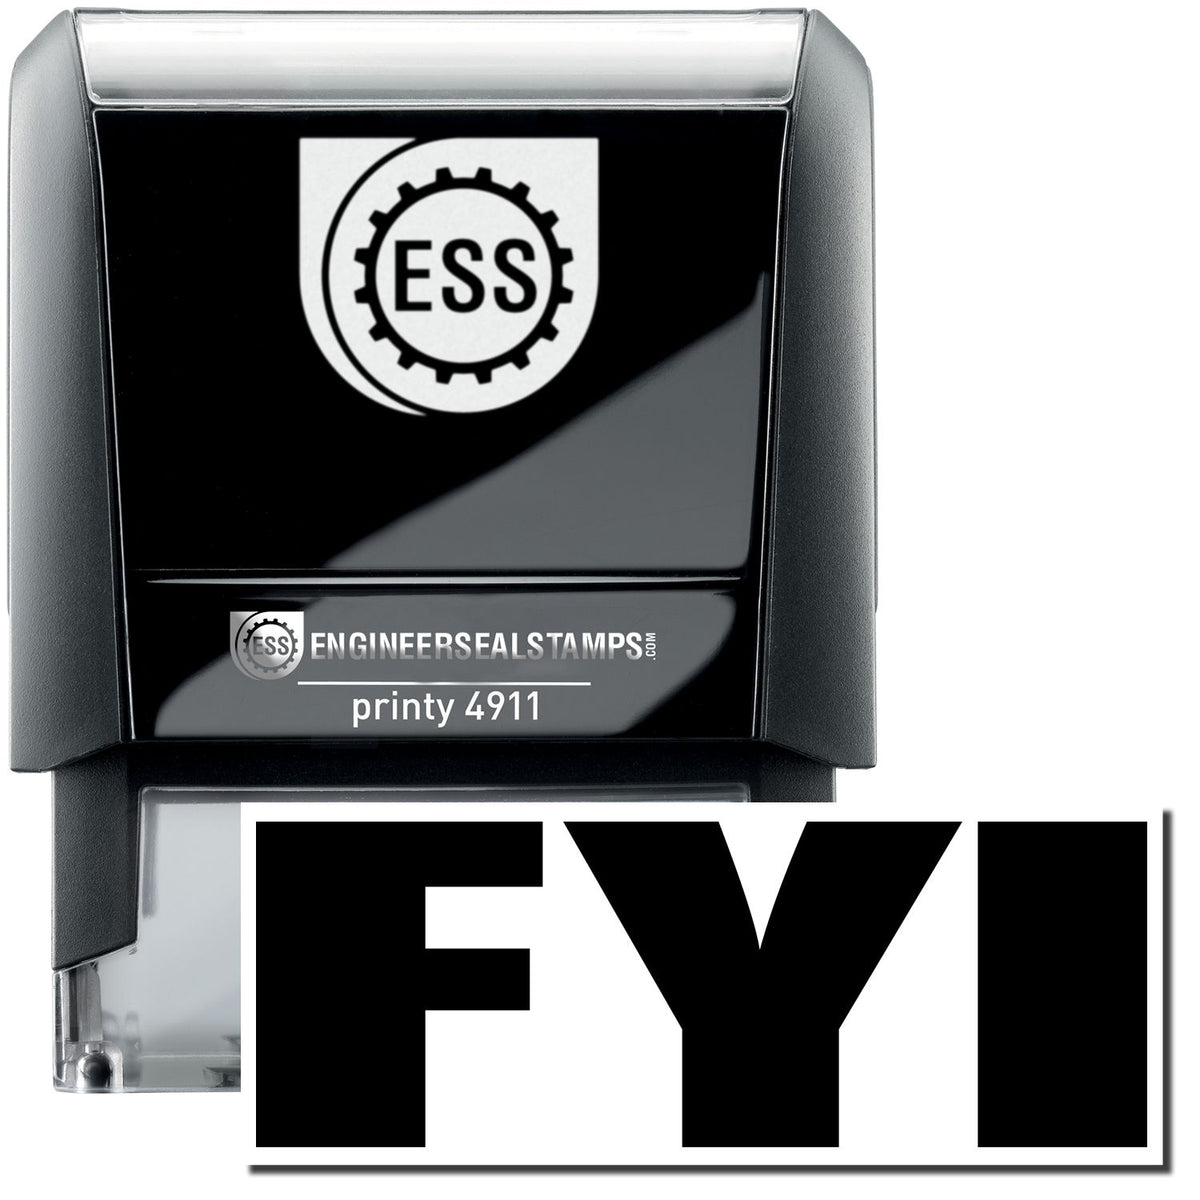 A self-inking stamp with a stamped image showing how the text &quot;FYI&quot; in bold font is displayed after stamping.